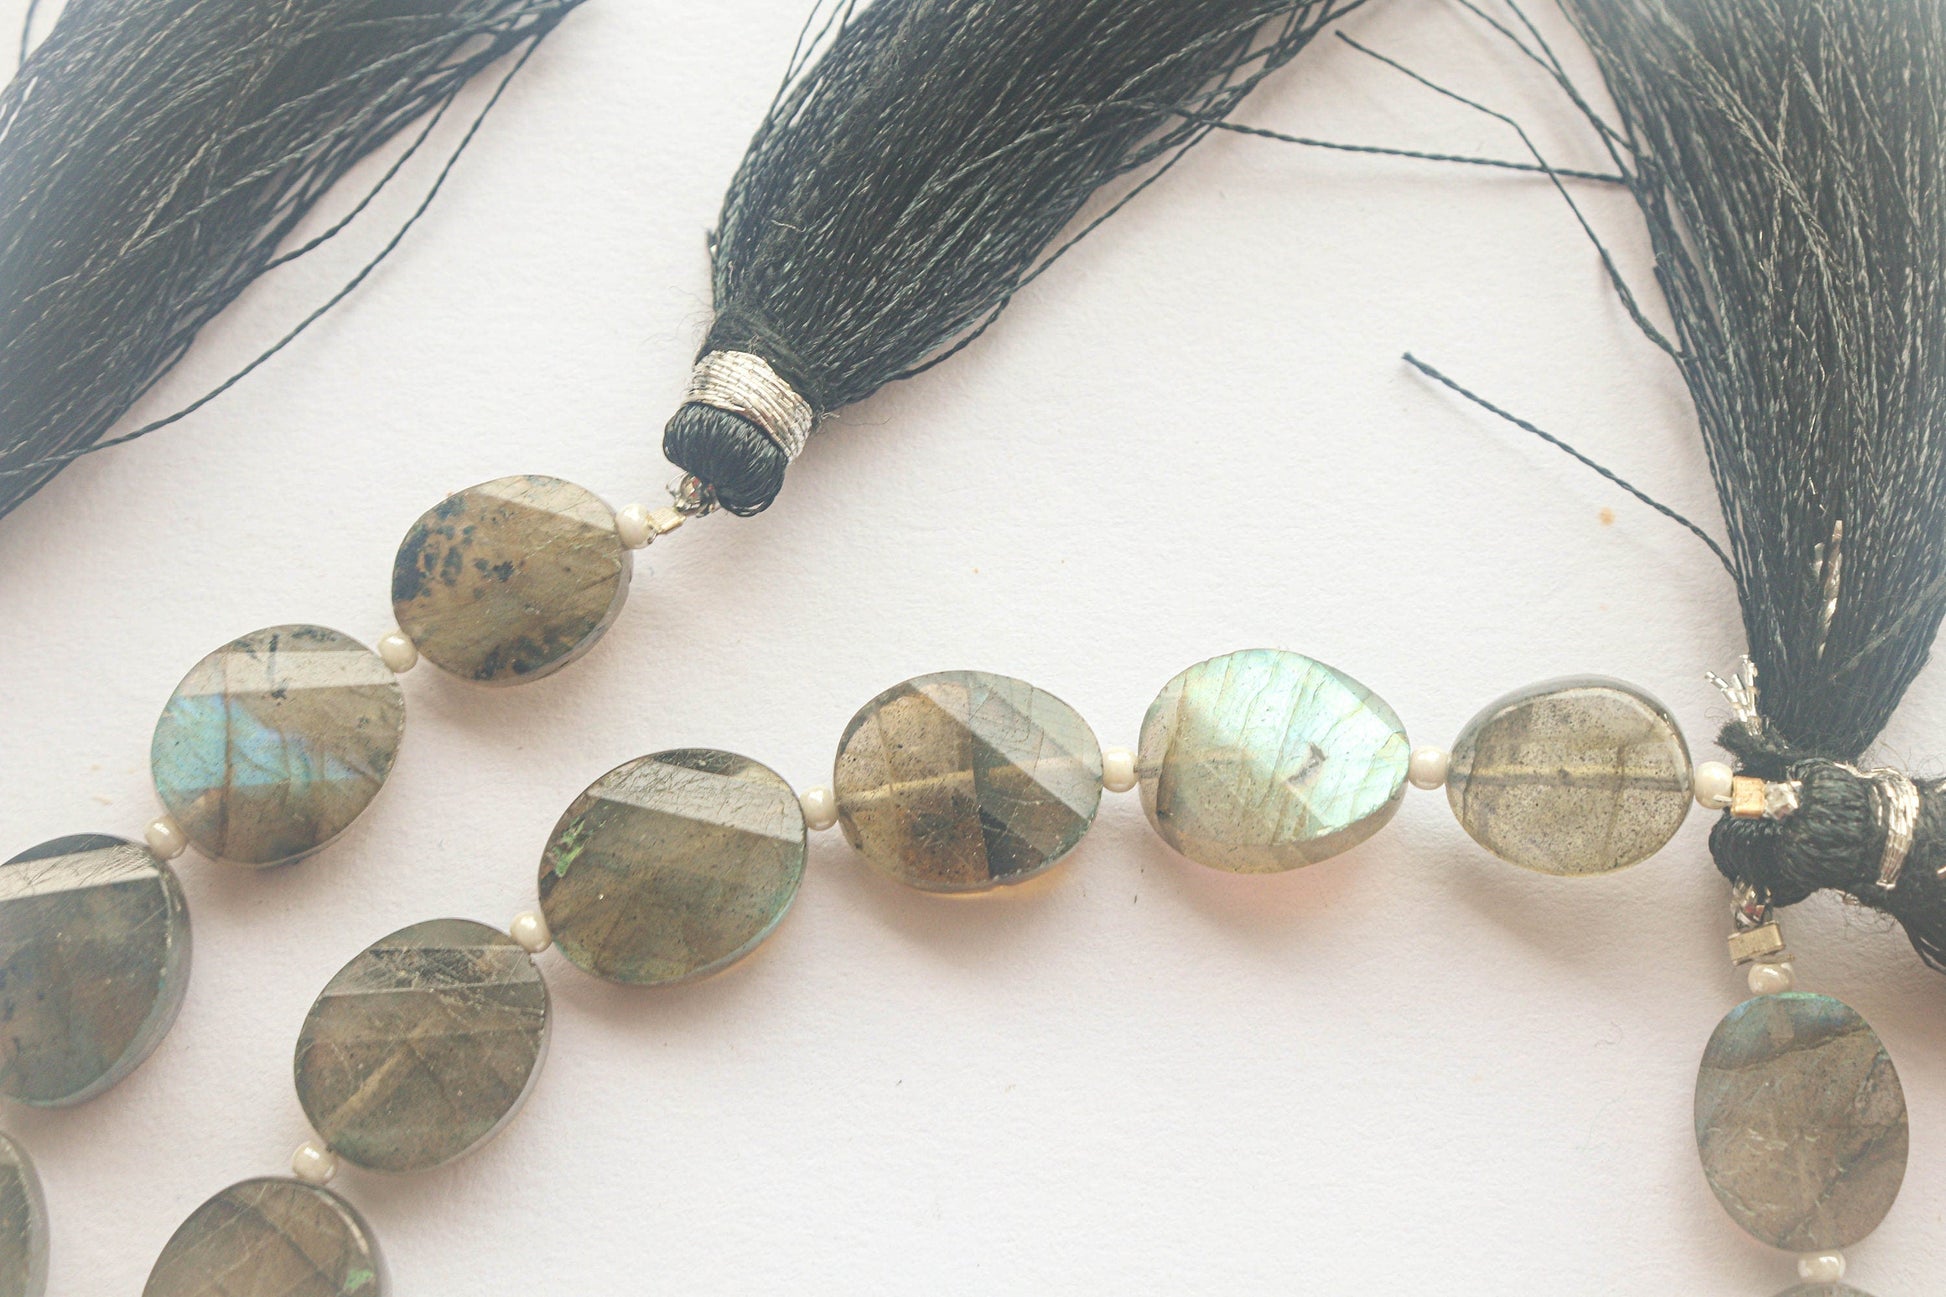 Labradorite Twisted Oval Shape Faceted Beads | 8 Inch String | Natural Labradorite | 16 Pieces String | Beadsforyourjewelry Beadsforyourjewelry